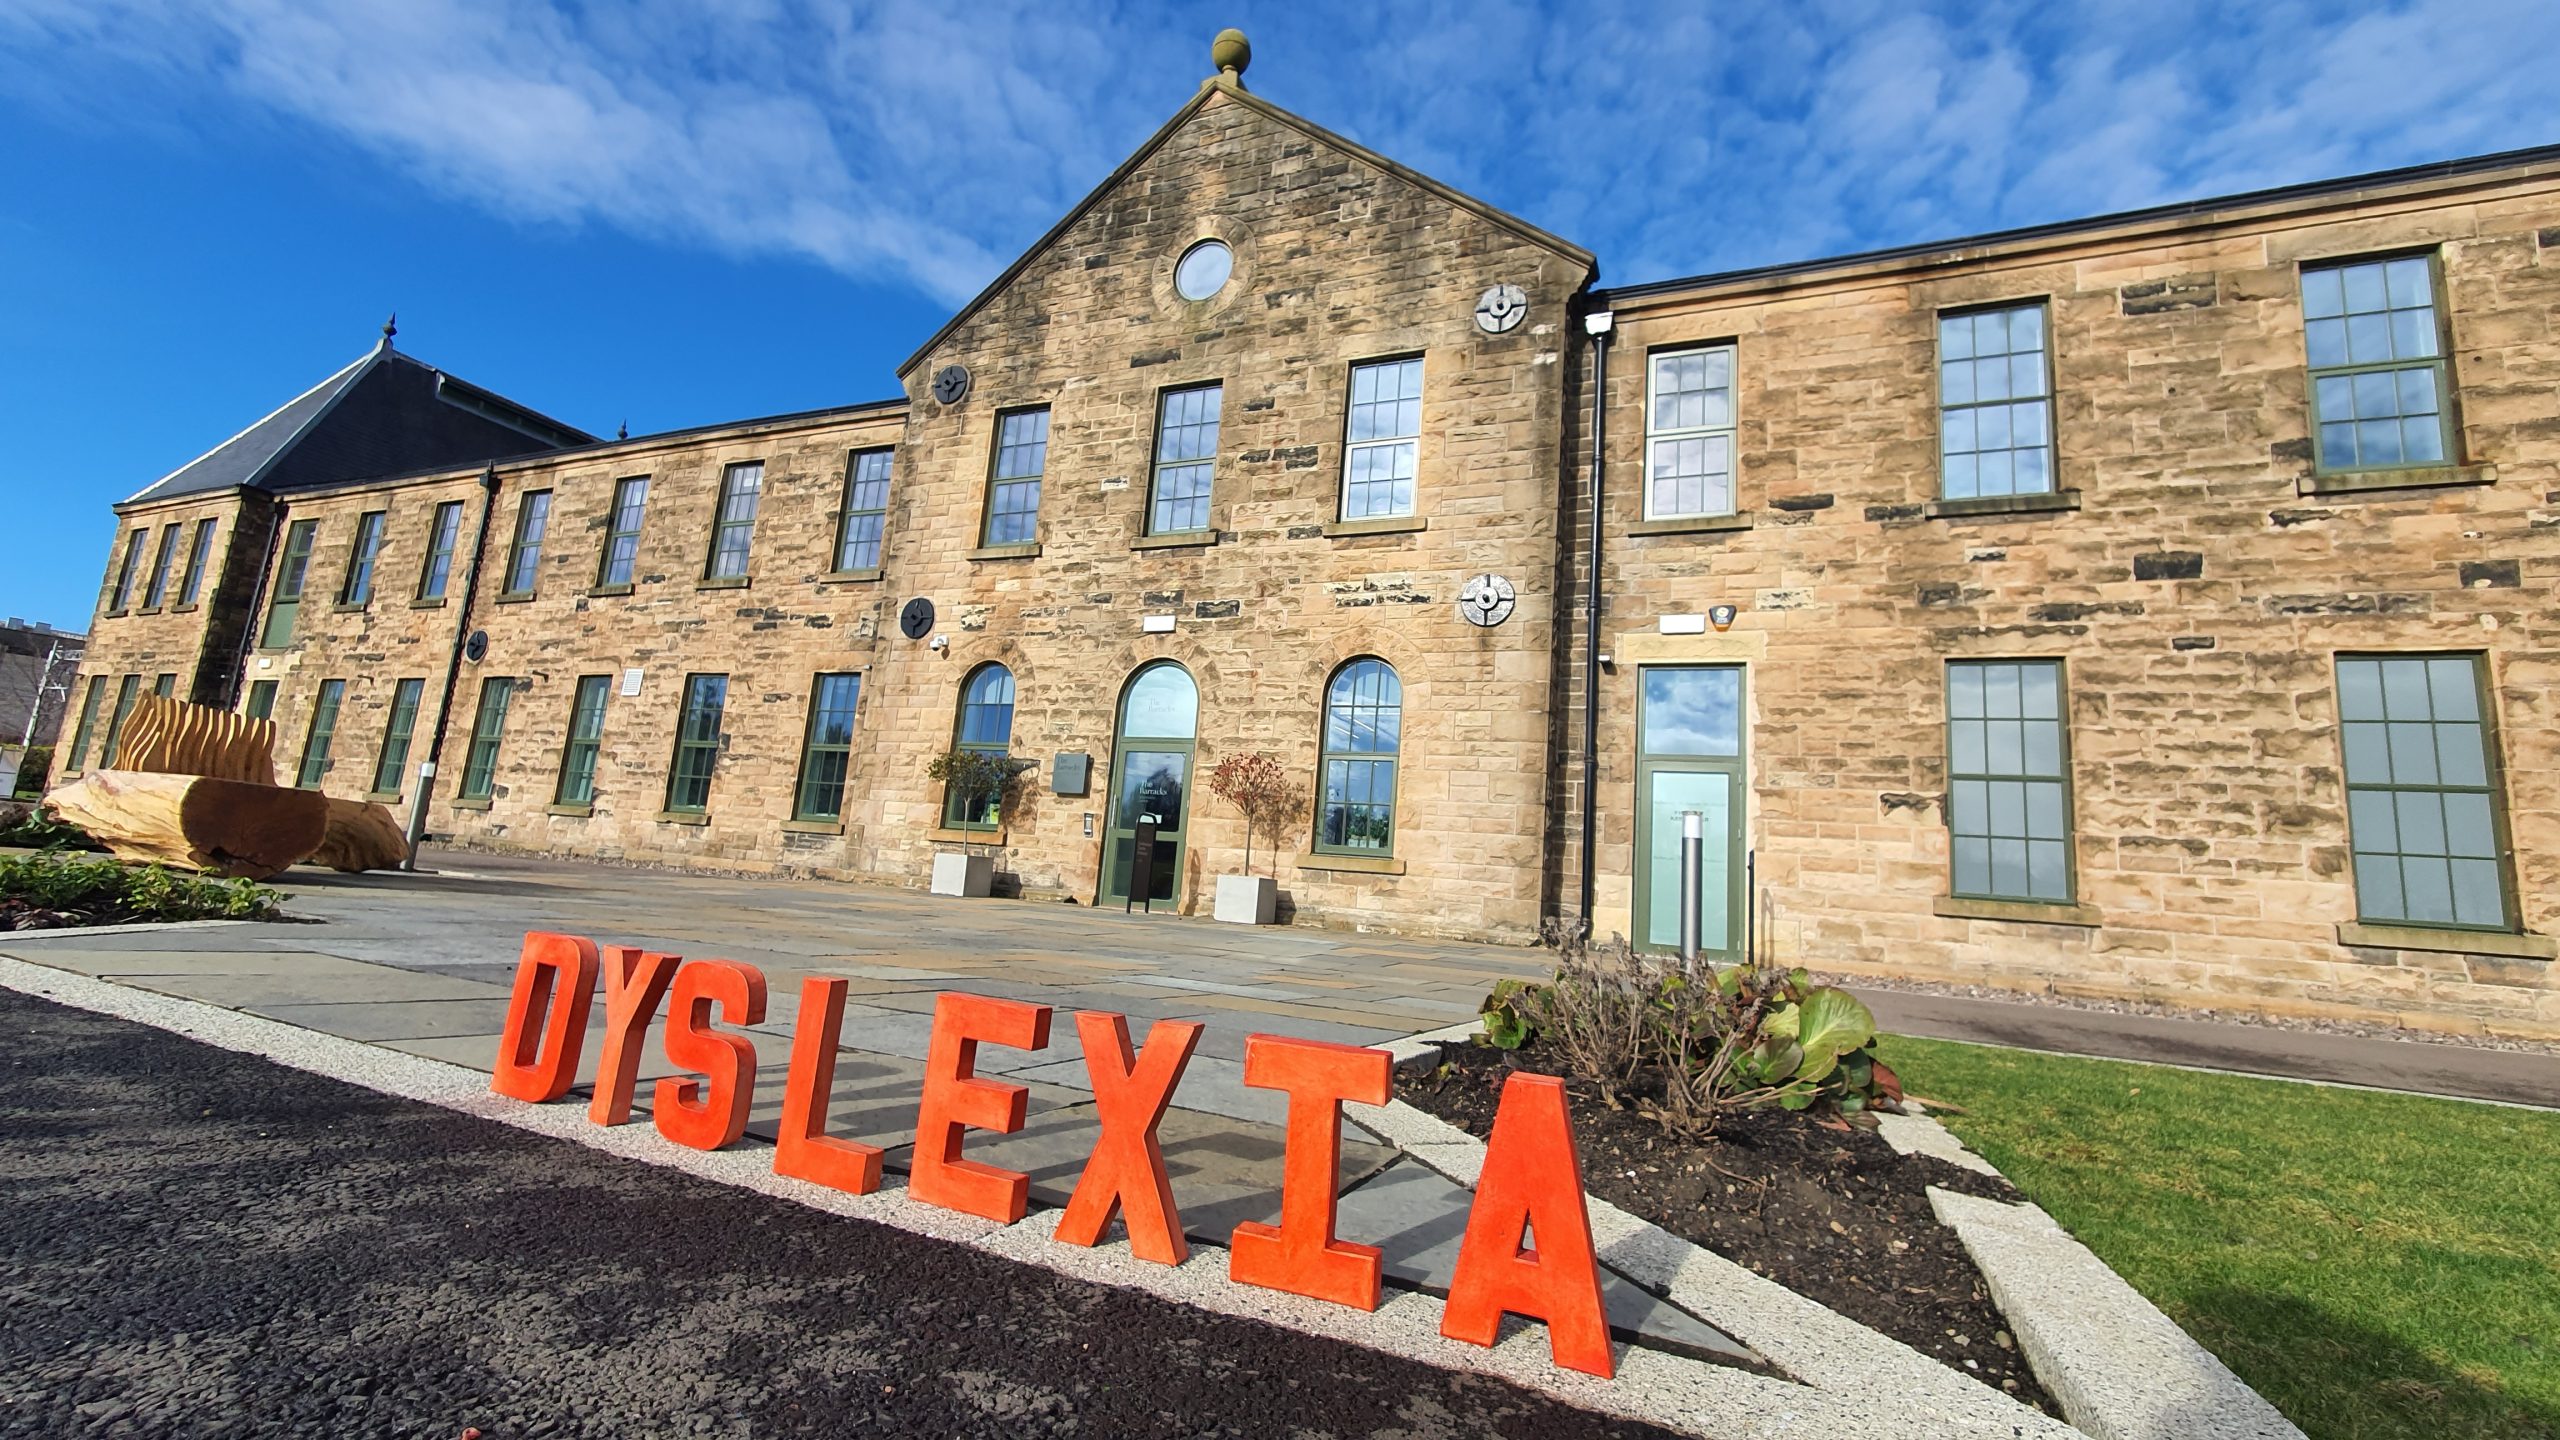 A worm's eye view of the front facade of Barracks Conference Centre, Stirling against a bright blue sky. The word 'dyslexia' is spelled out in red letters in the foreground.